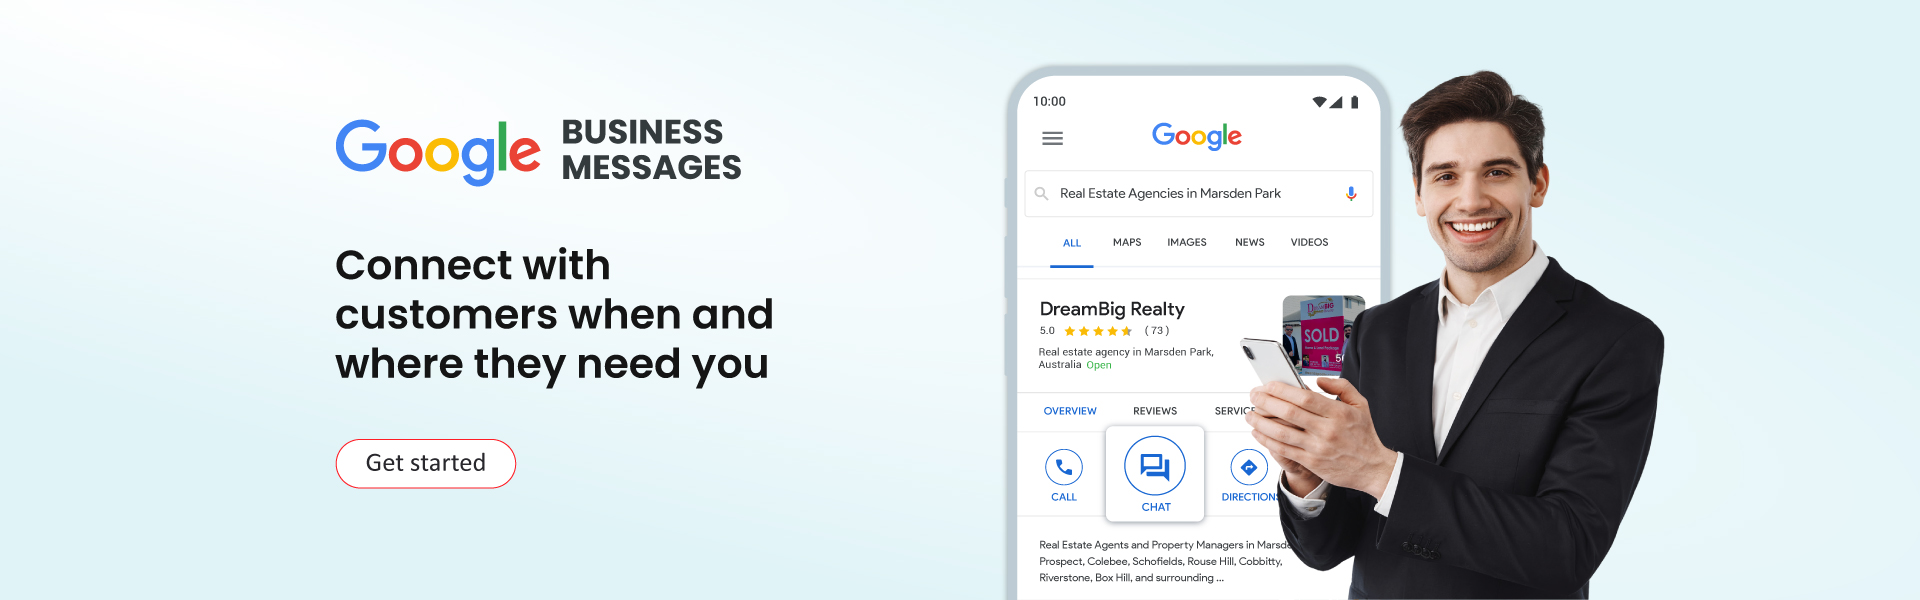 Google Business Messages And Realbot